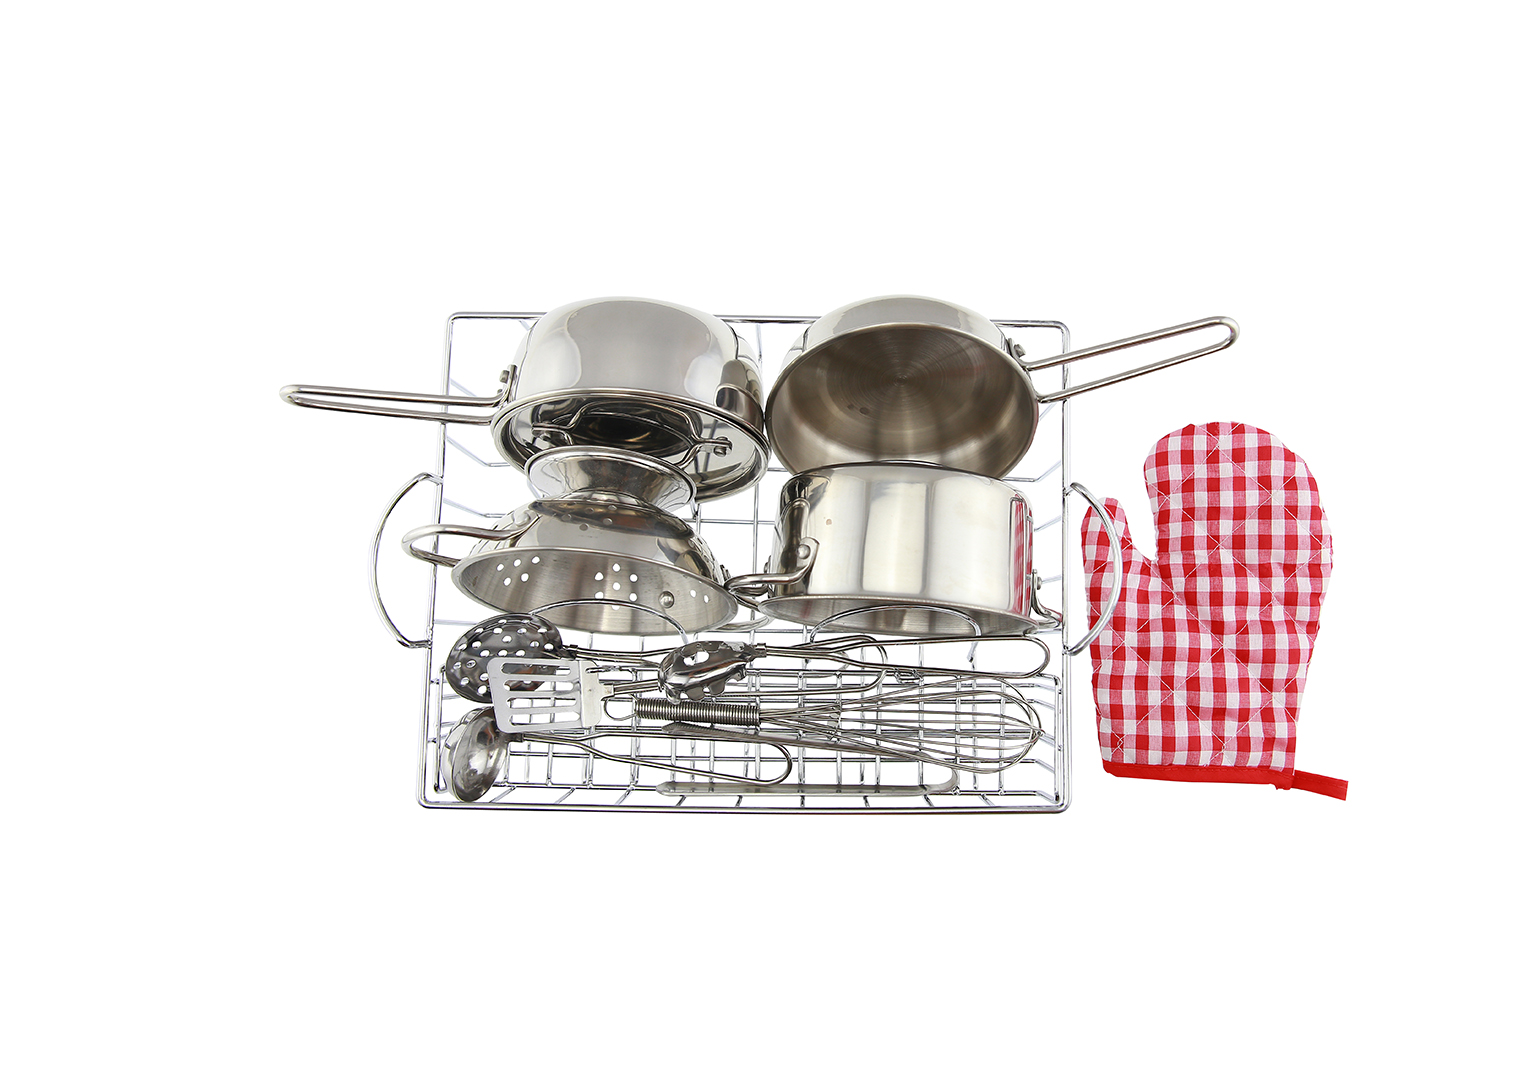 13 Piece Stainless Steel Pretend Play Cookware Set